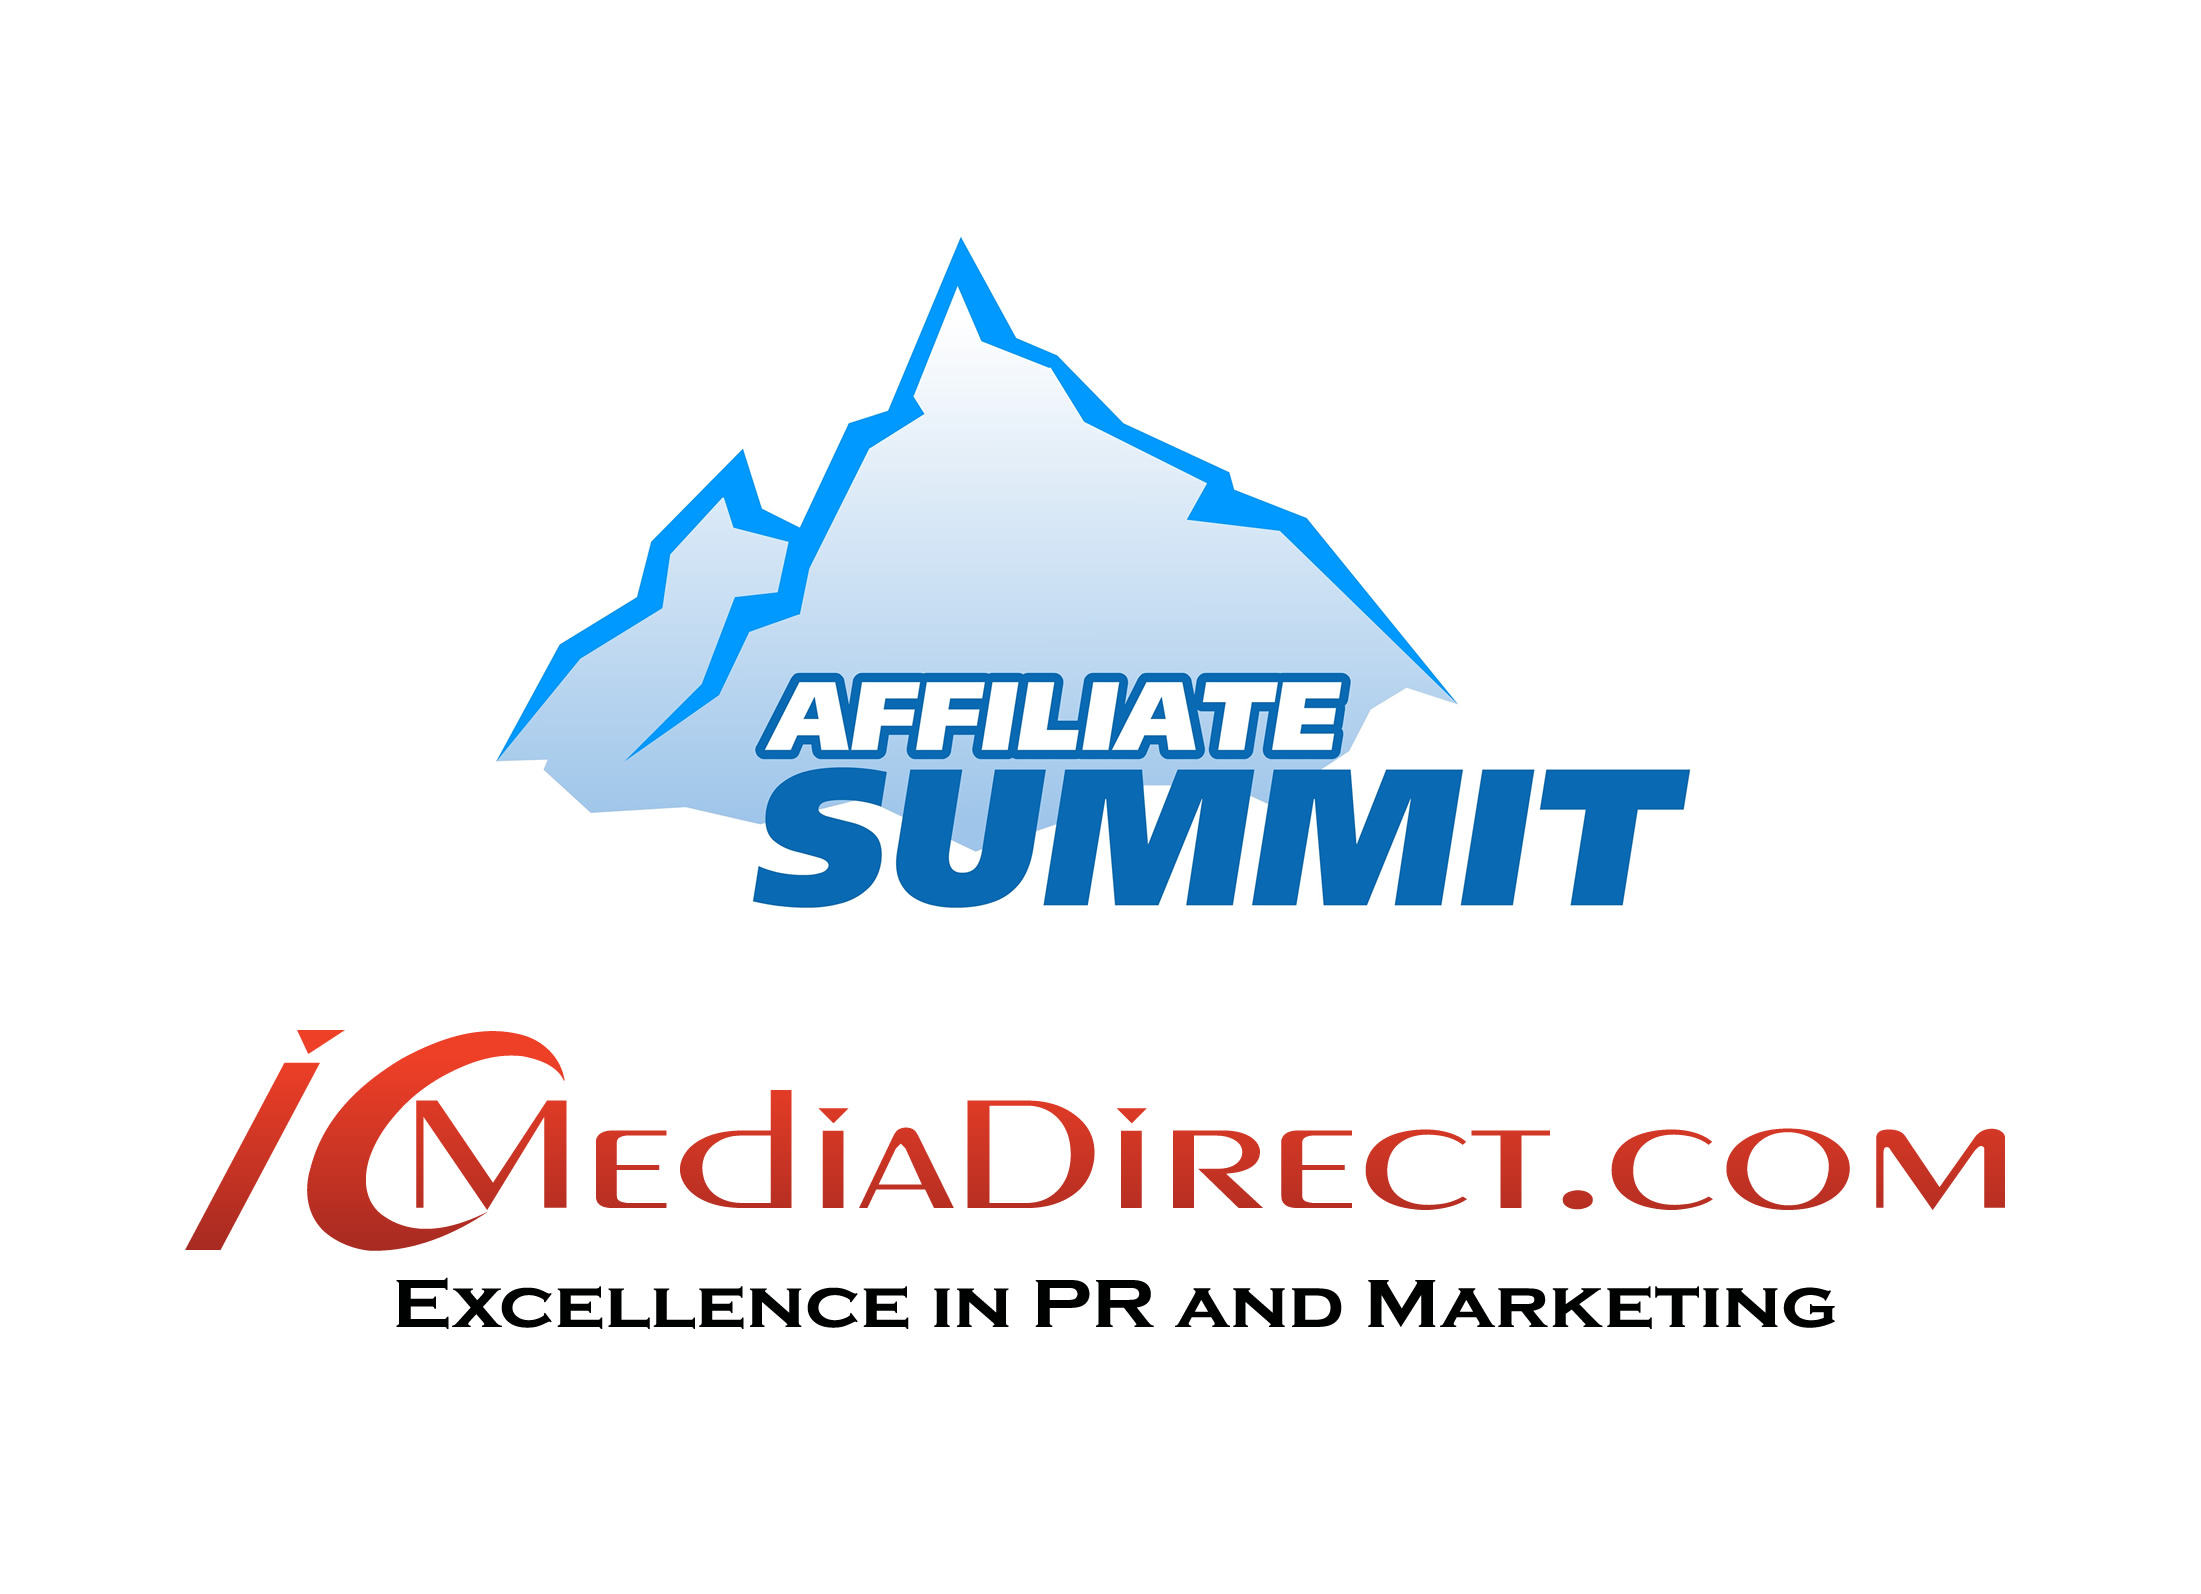 ICMediaDirect Honored To Join Top Influencers At Affiliate Summit